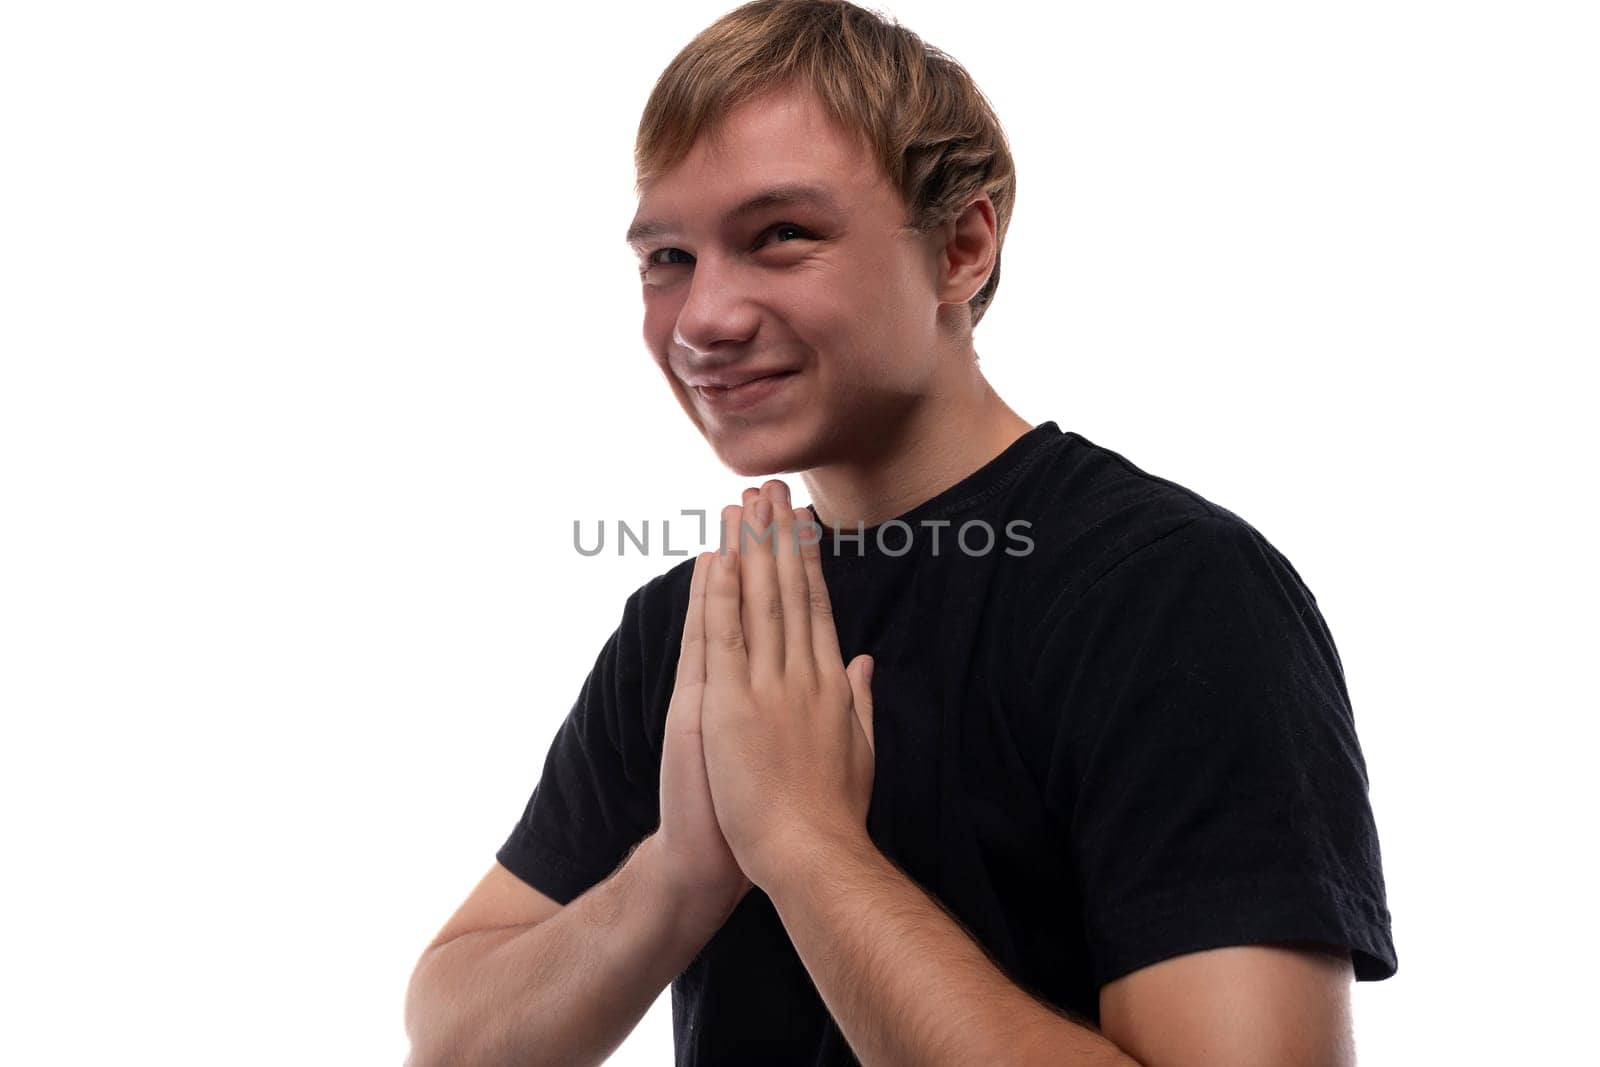 Blonde teenager dressed in a basic t-shirt rejoices on a white background.